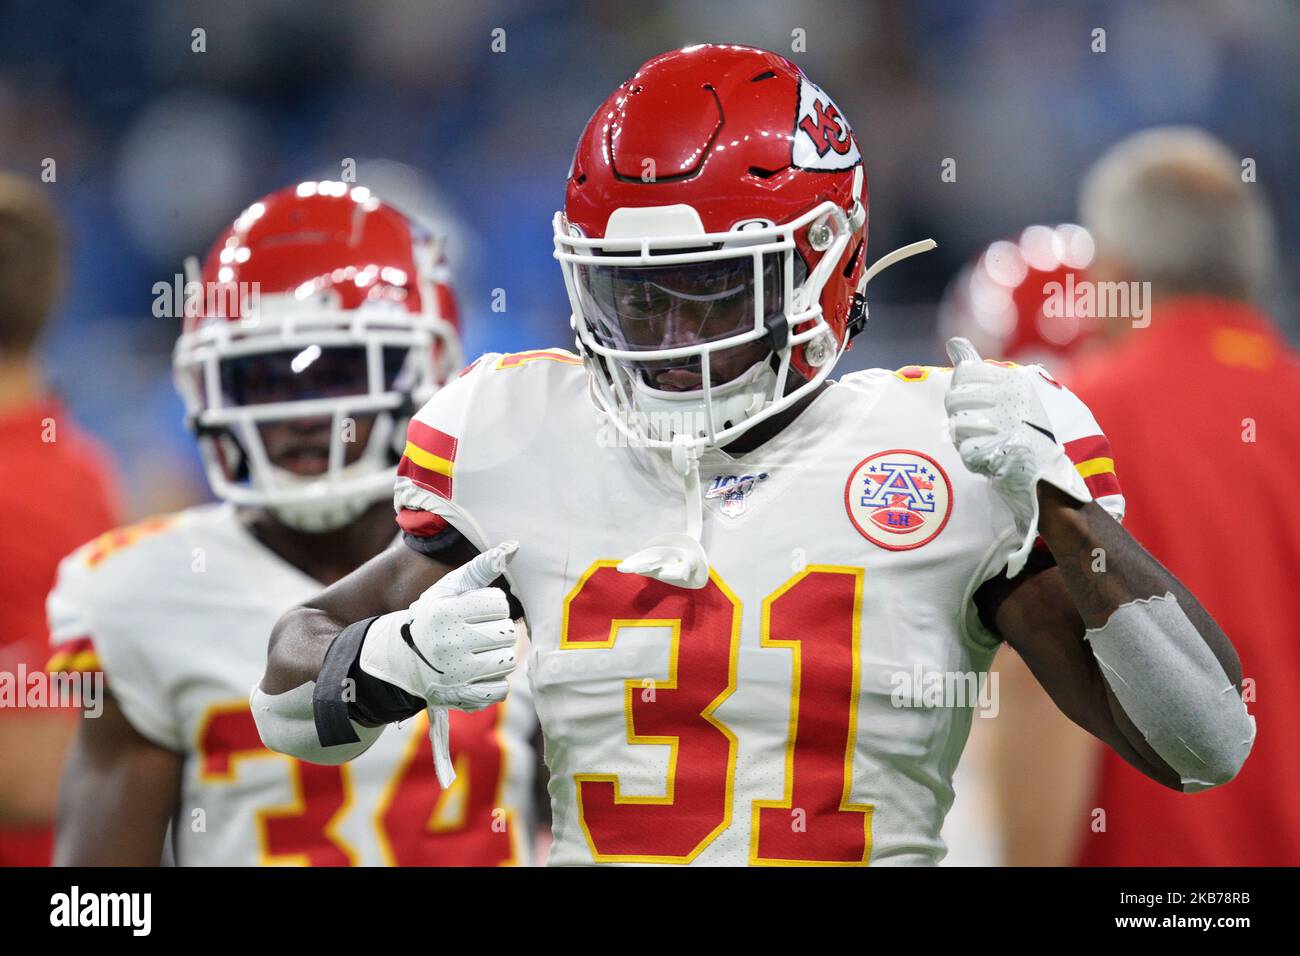 Kansas City Chiefs running back Darrel Williams (31) is seen during an NFL football game against the Detroit Lions in Detroit, Michigan USA, on Sunday, September 29, 2019 (Photo by Jorge Lemus/NurPhoto) Stock Photo